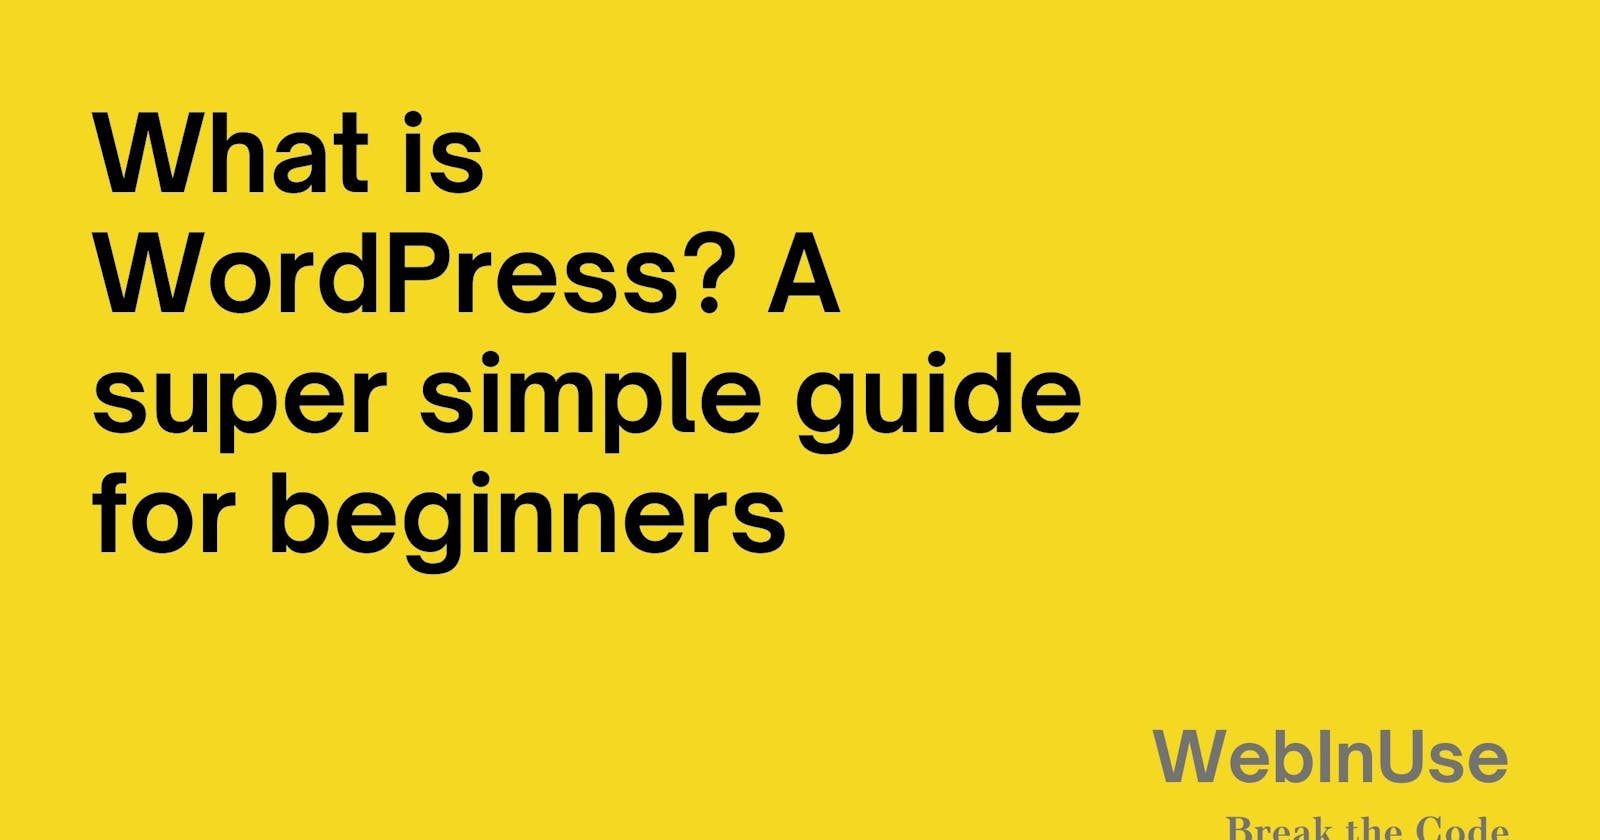 What is WordPress? A super simple guide for beginners